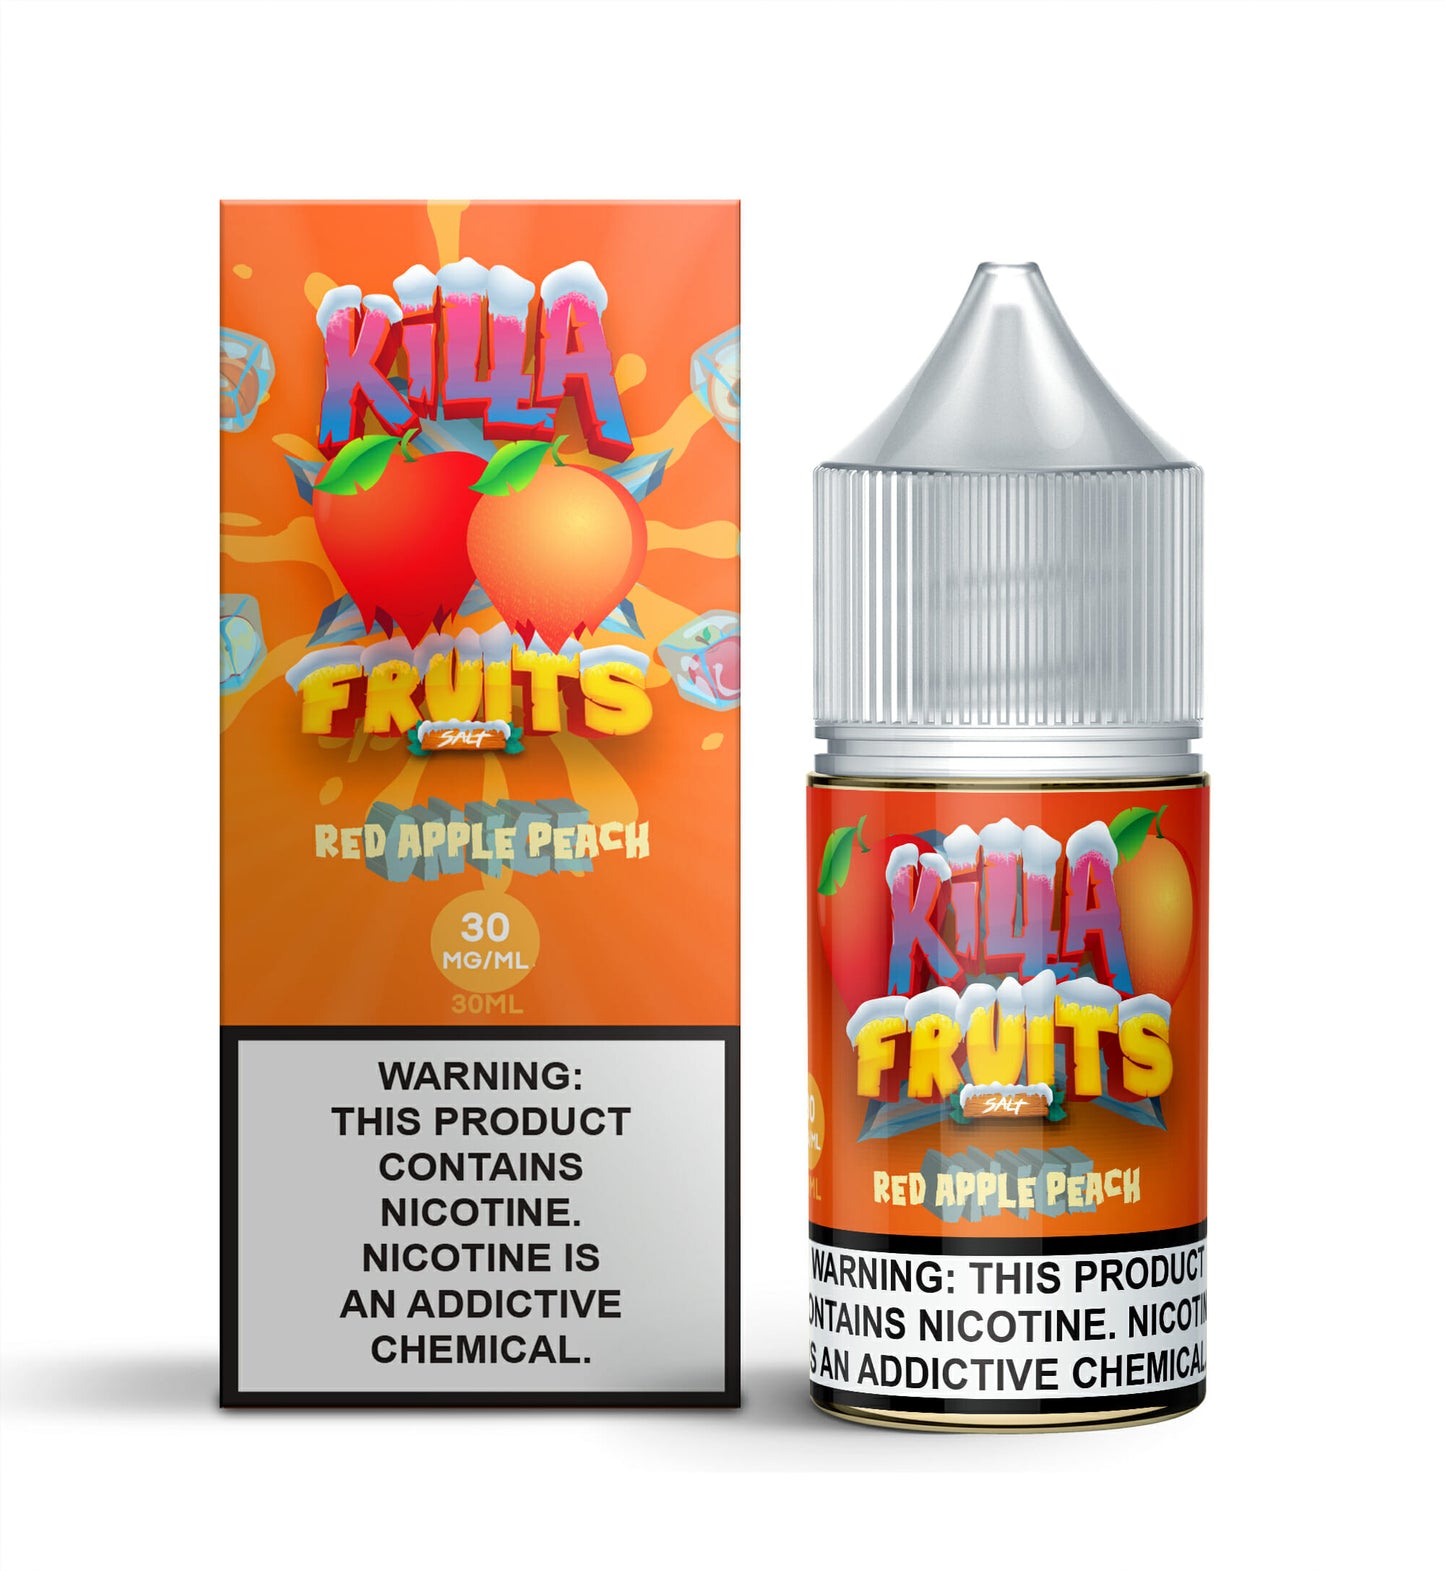 Red Apple Peach Ice by Killa Fruits Salts Series 30mL with Packaging